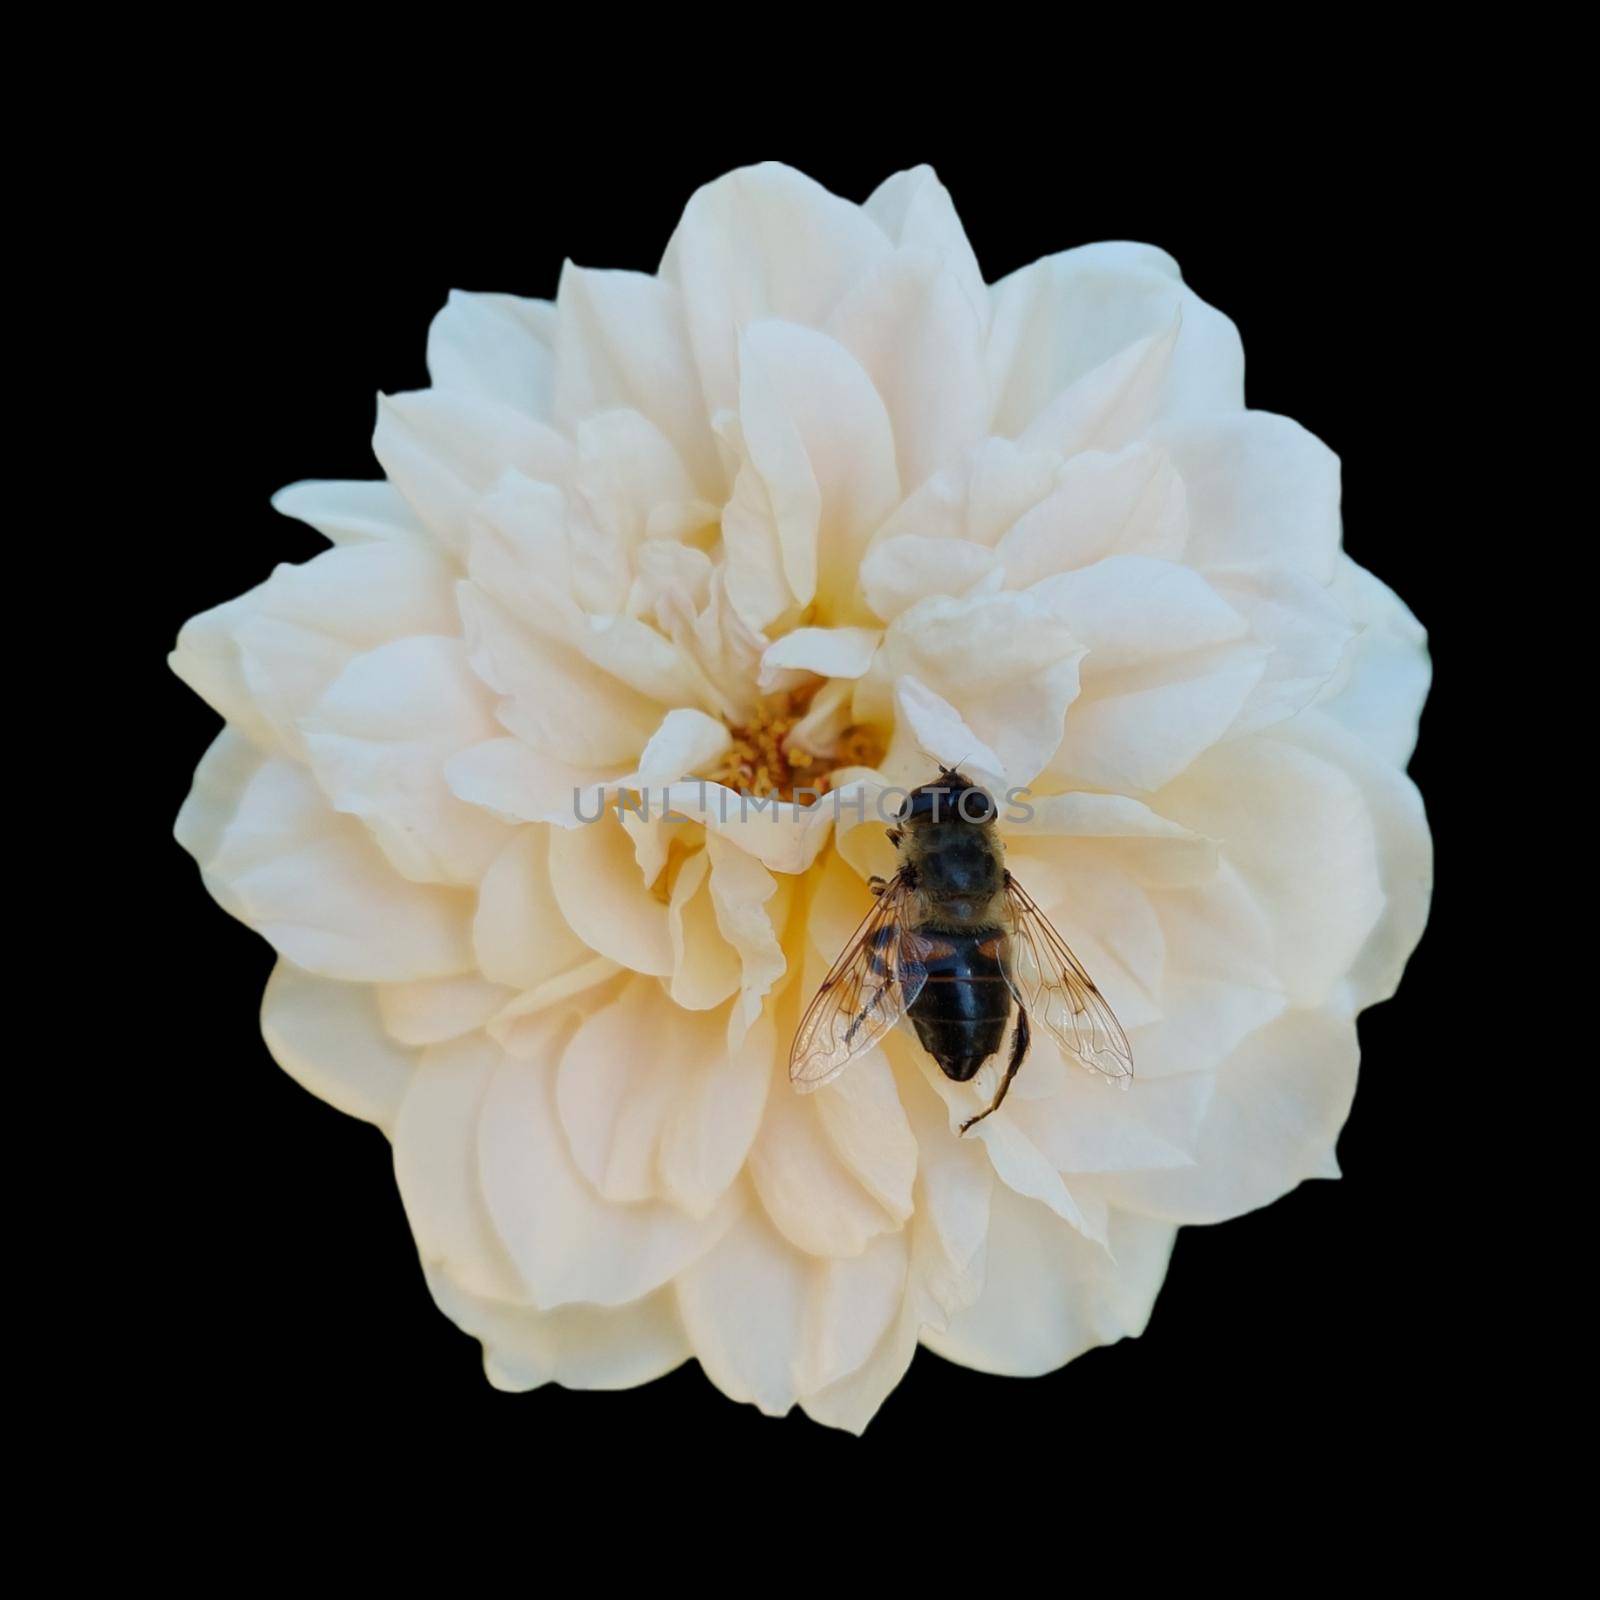 white rose isolated on black background with bee. High quality photo